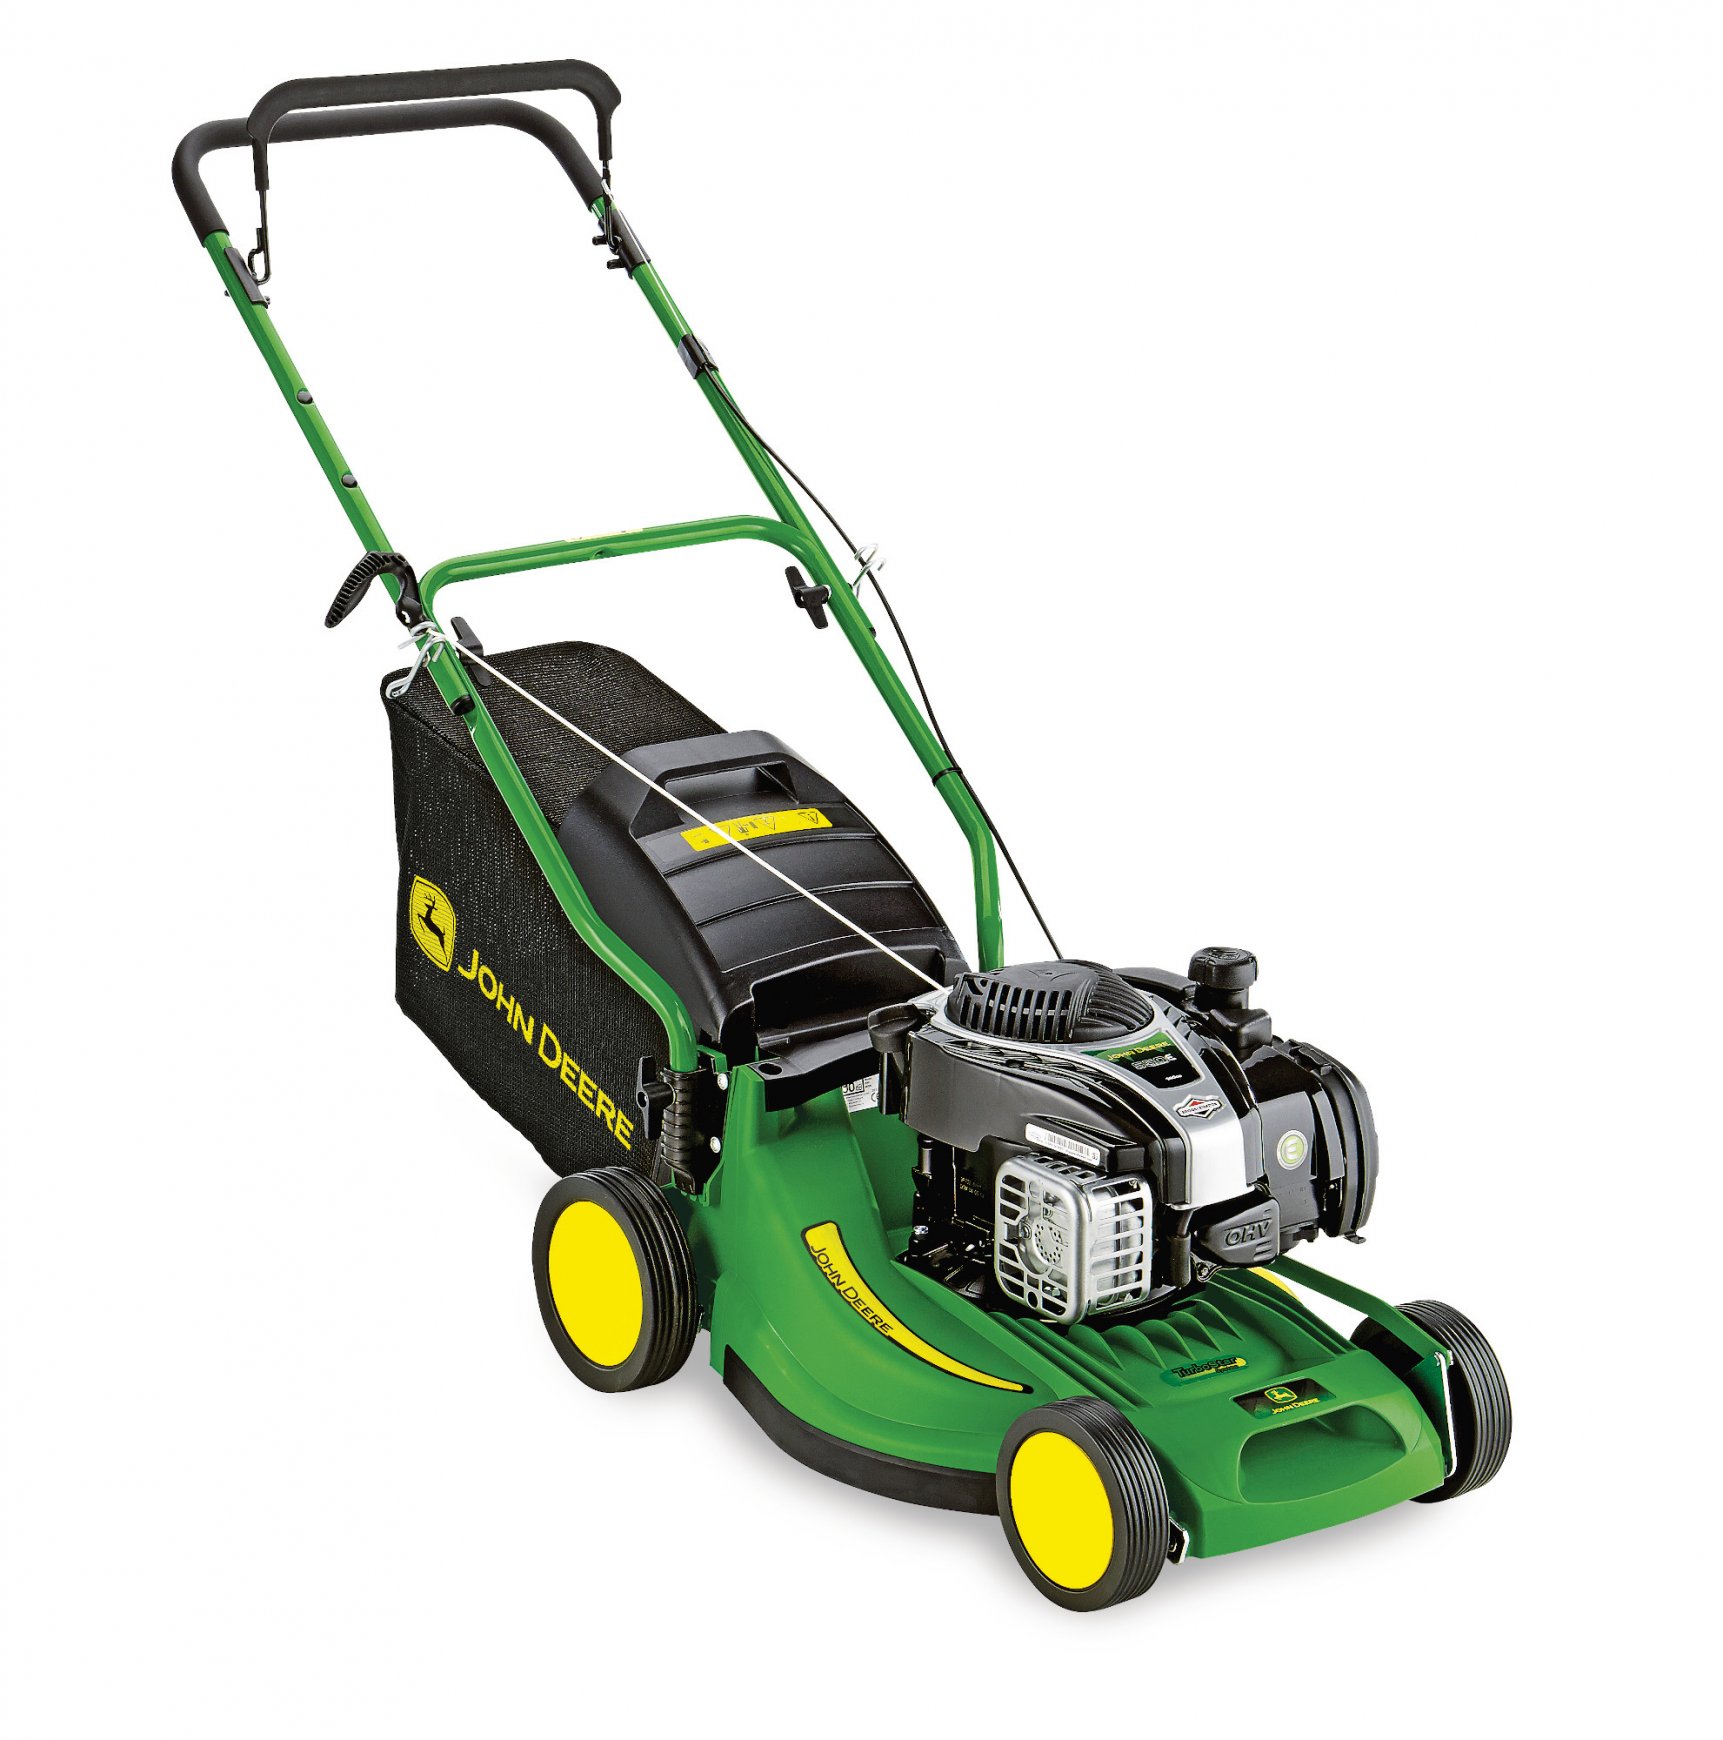 s220-lawn-tractor-with-42-in-deck-new-john-deere-s200-sport-series